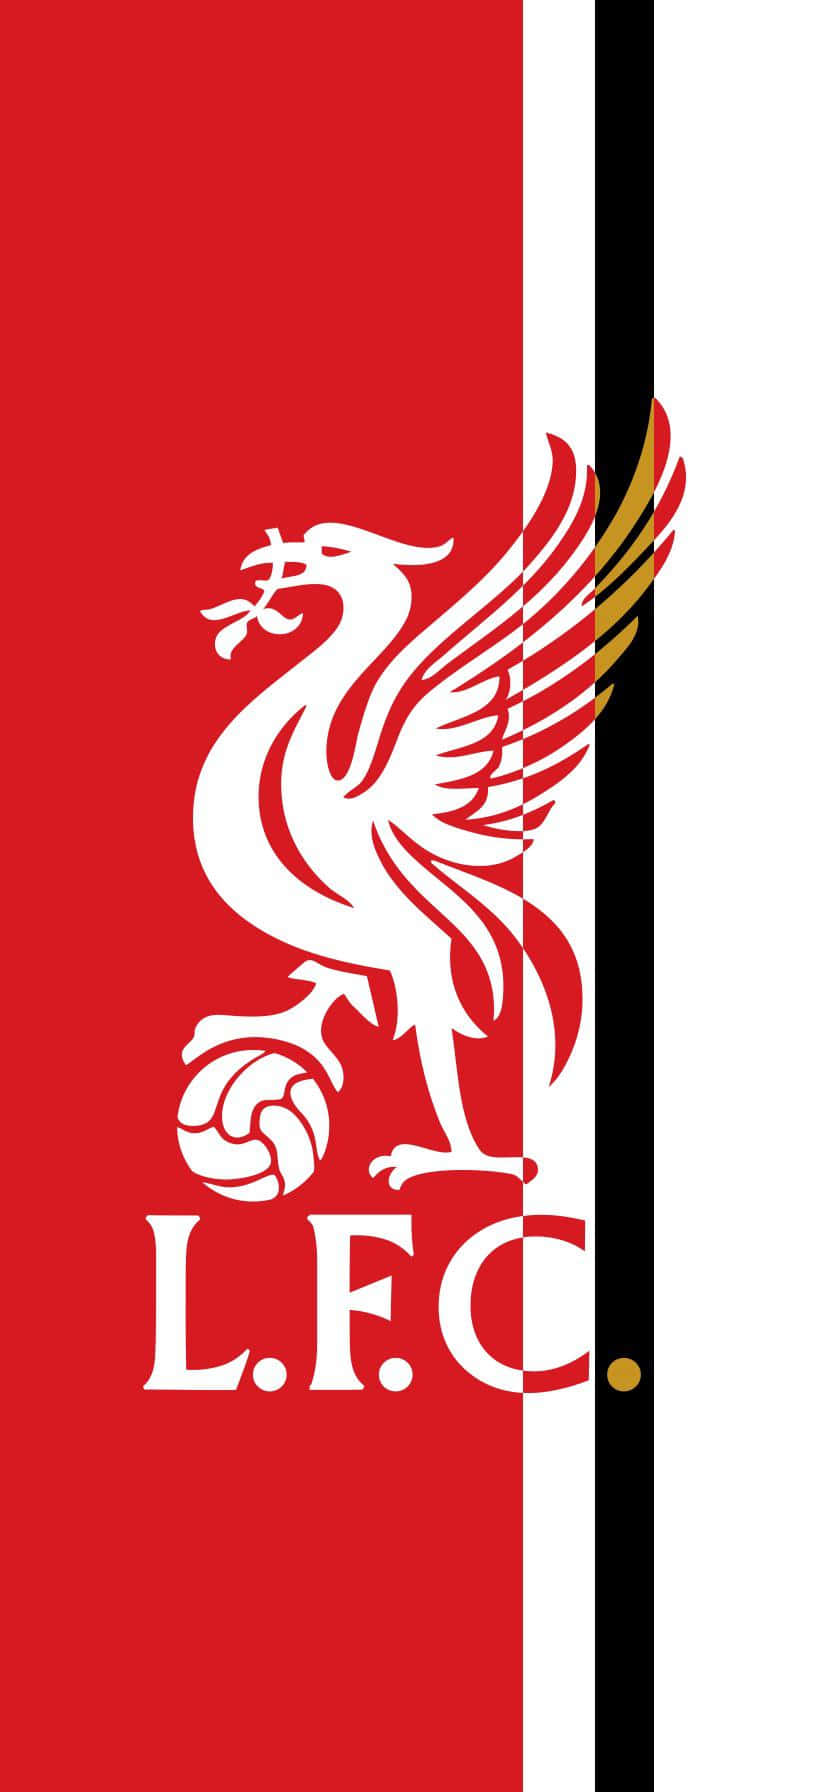 Show your support for Liverpool with the perfect wallpaper for your iPhone Wallpaper